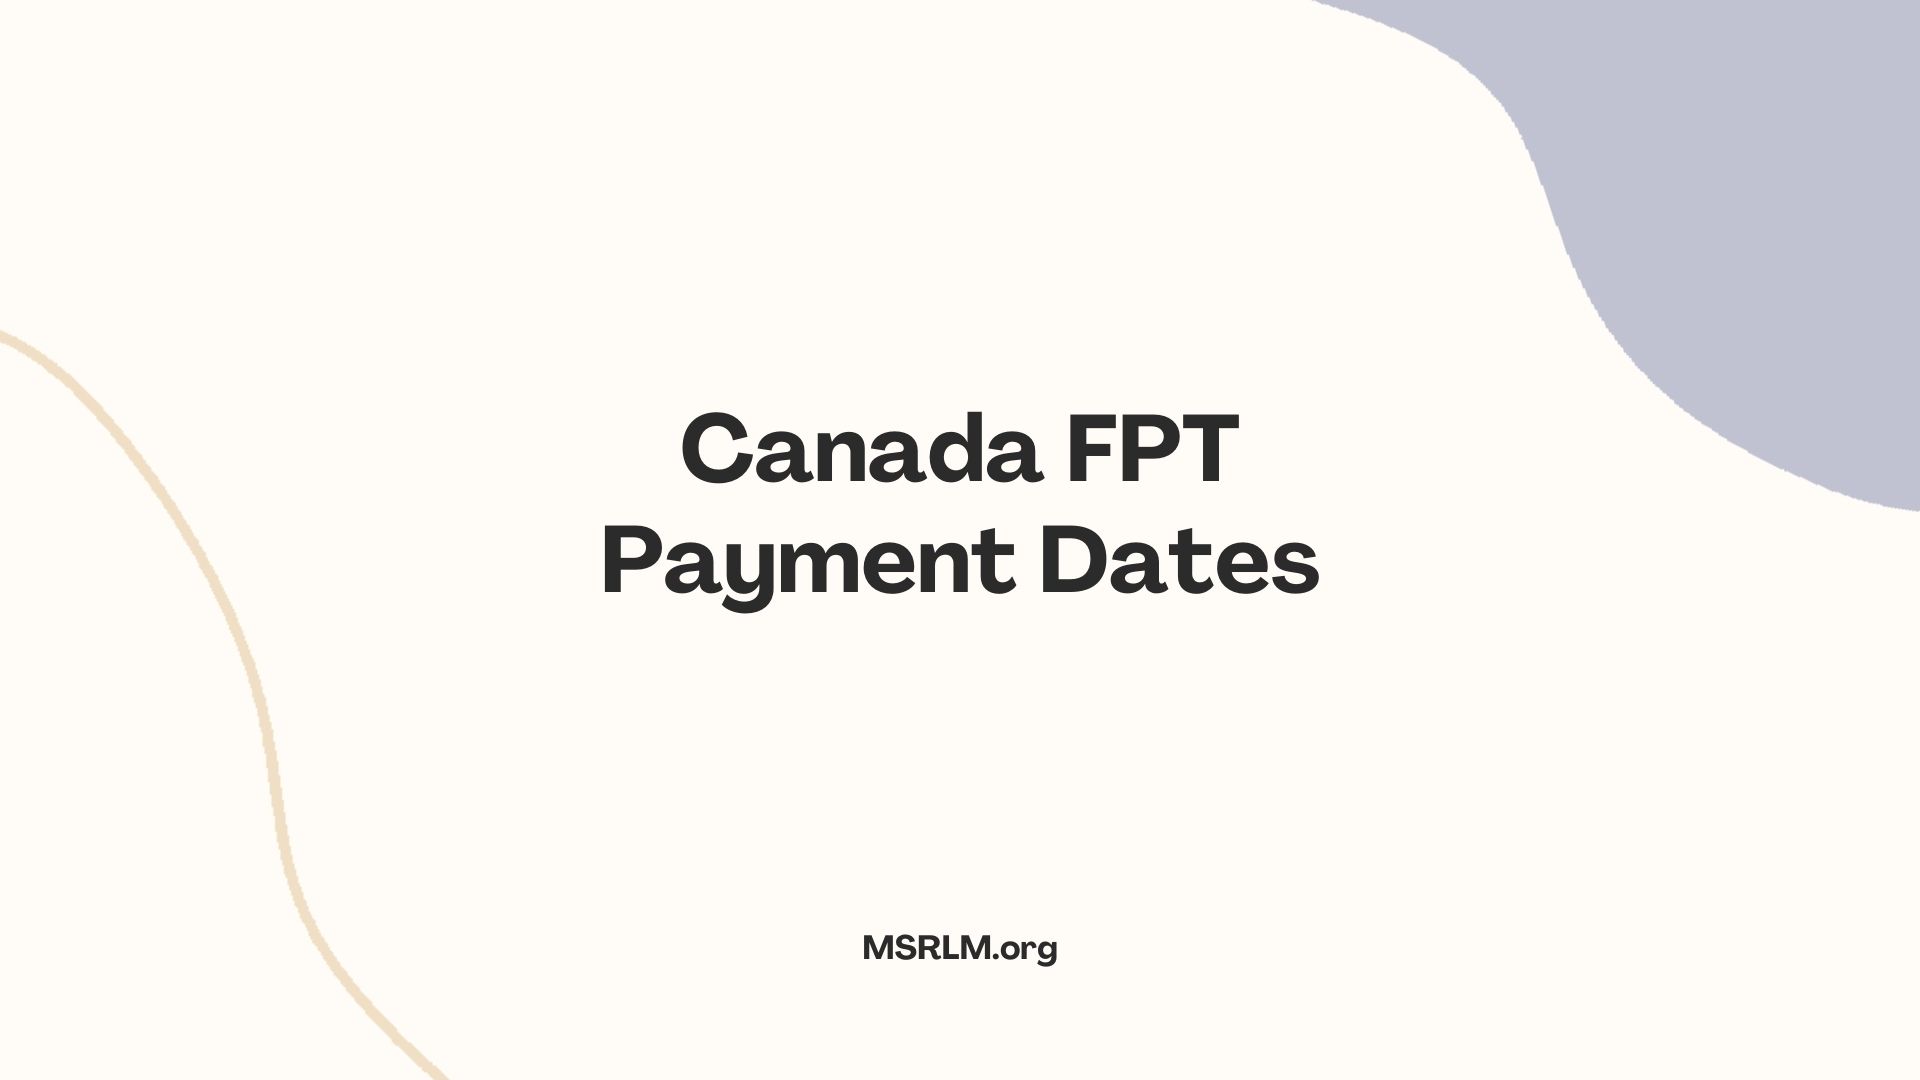 Canada FPT Payment Dates